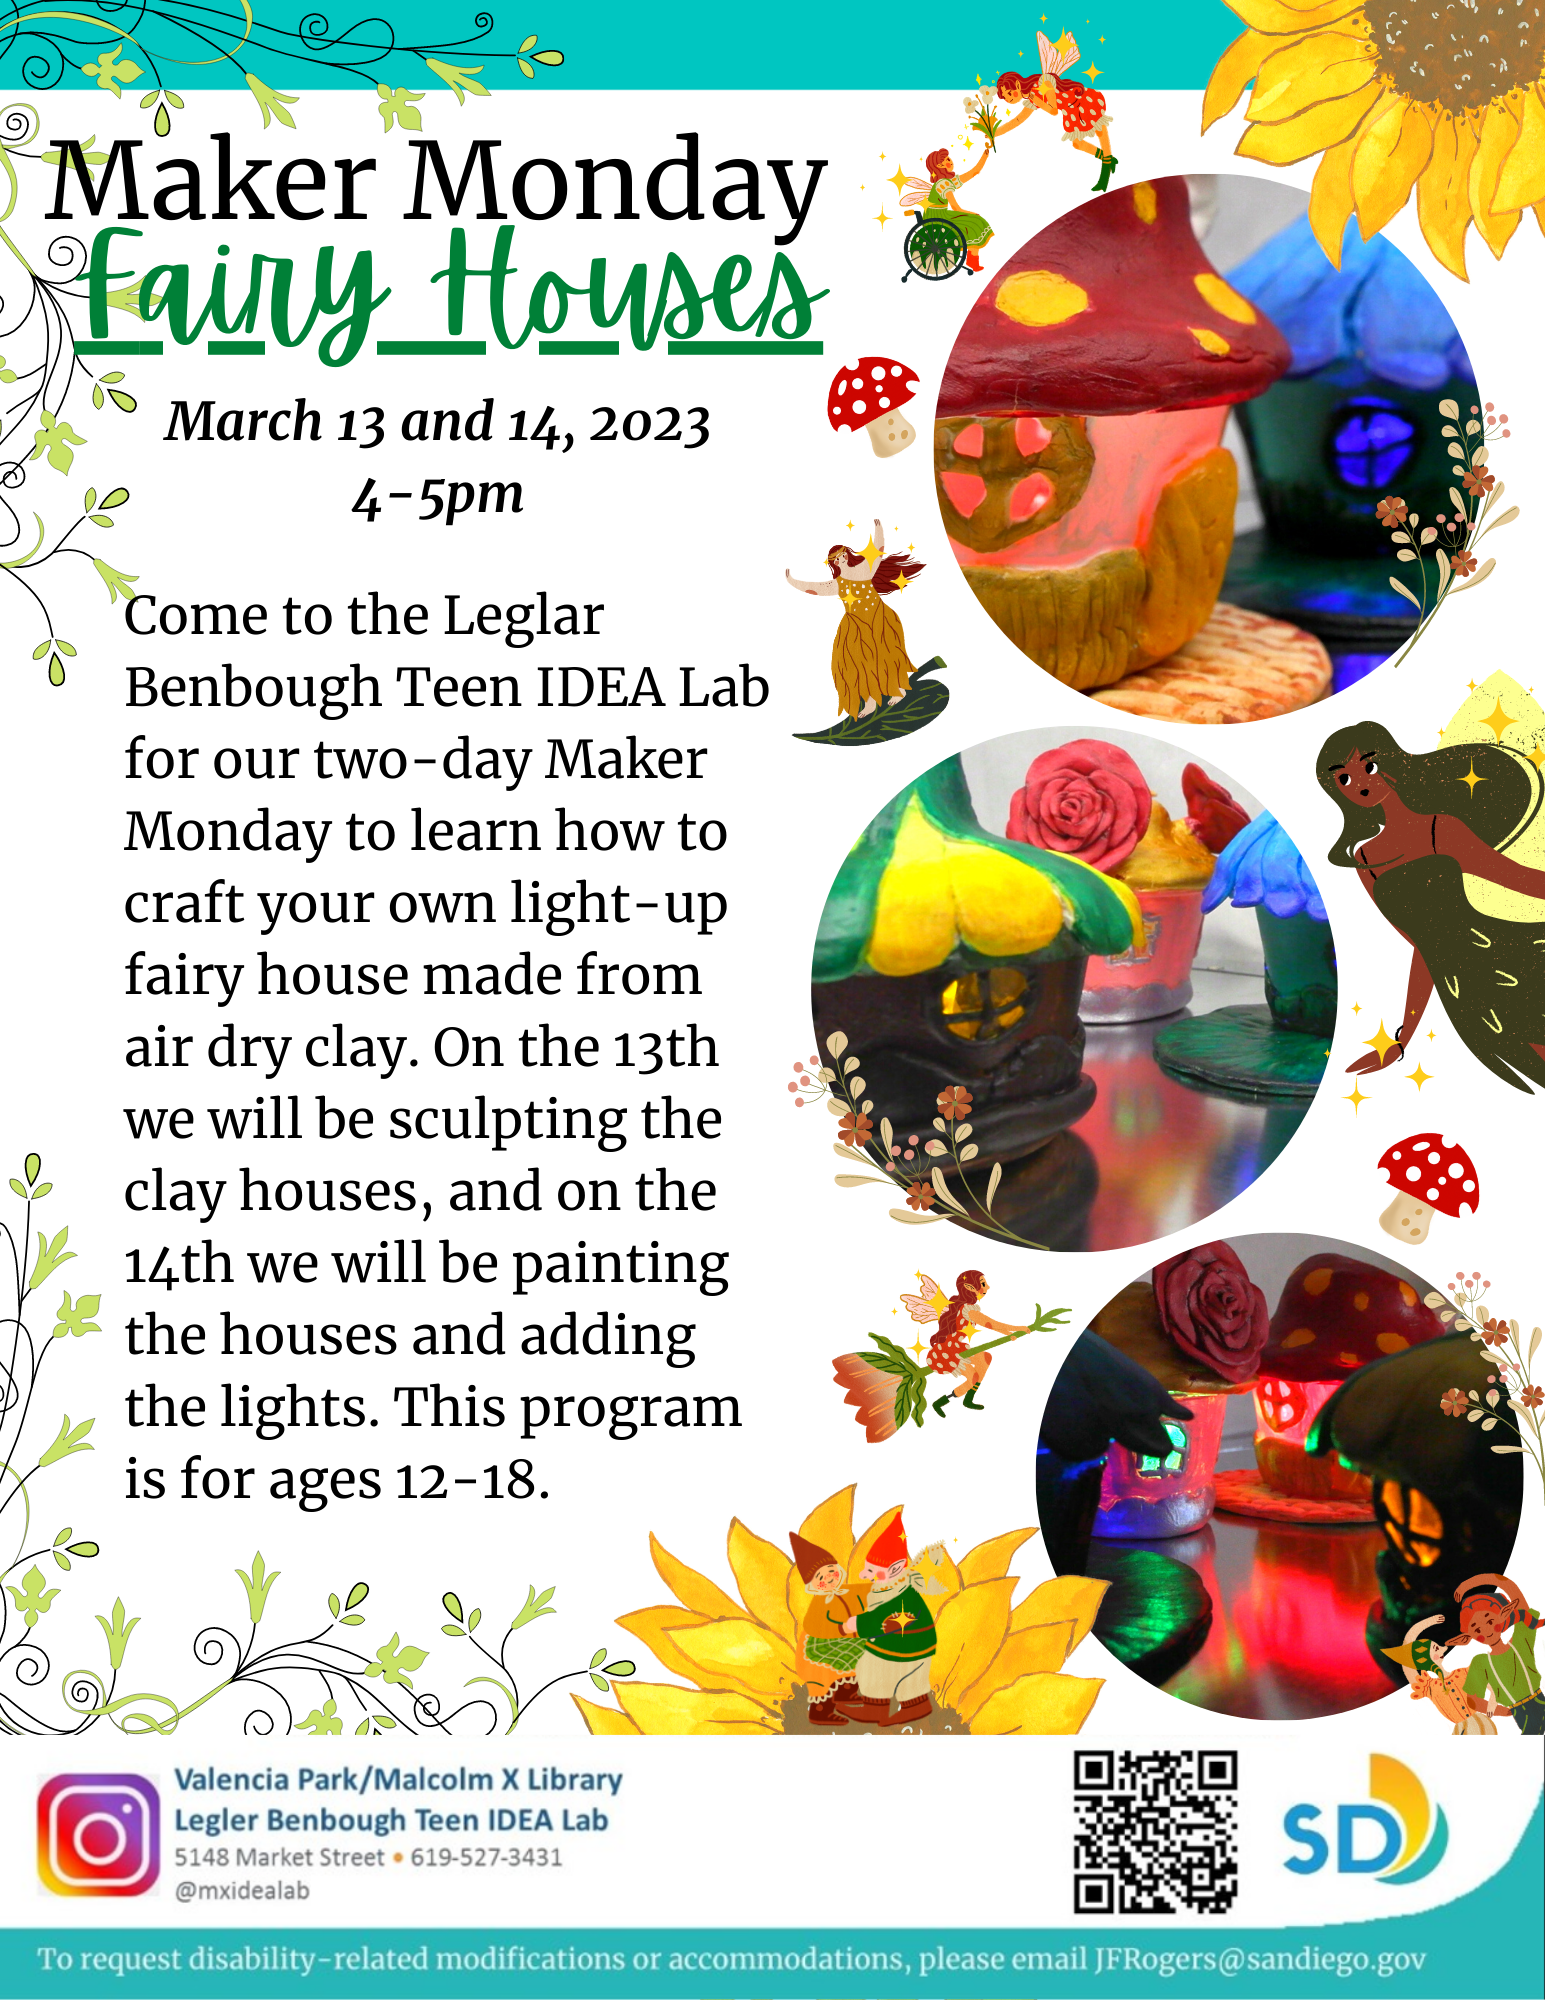 Maker Monday for March 13th and 14th featuring colorful fairy houses that light up.